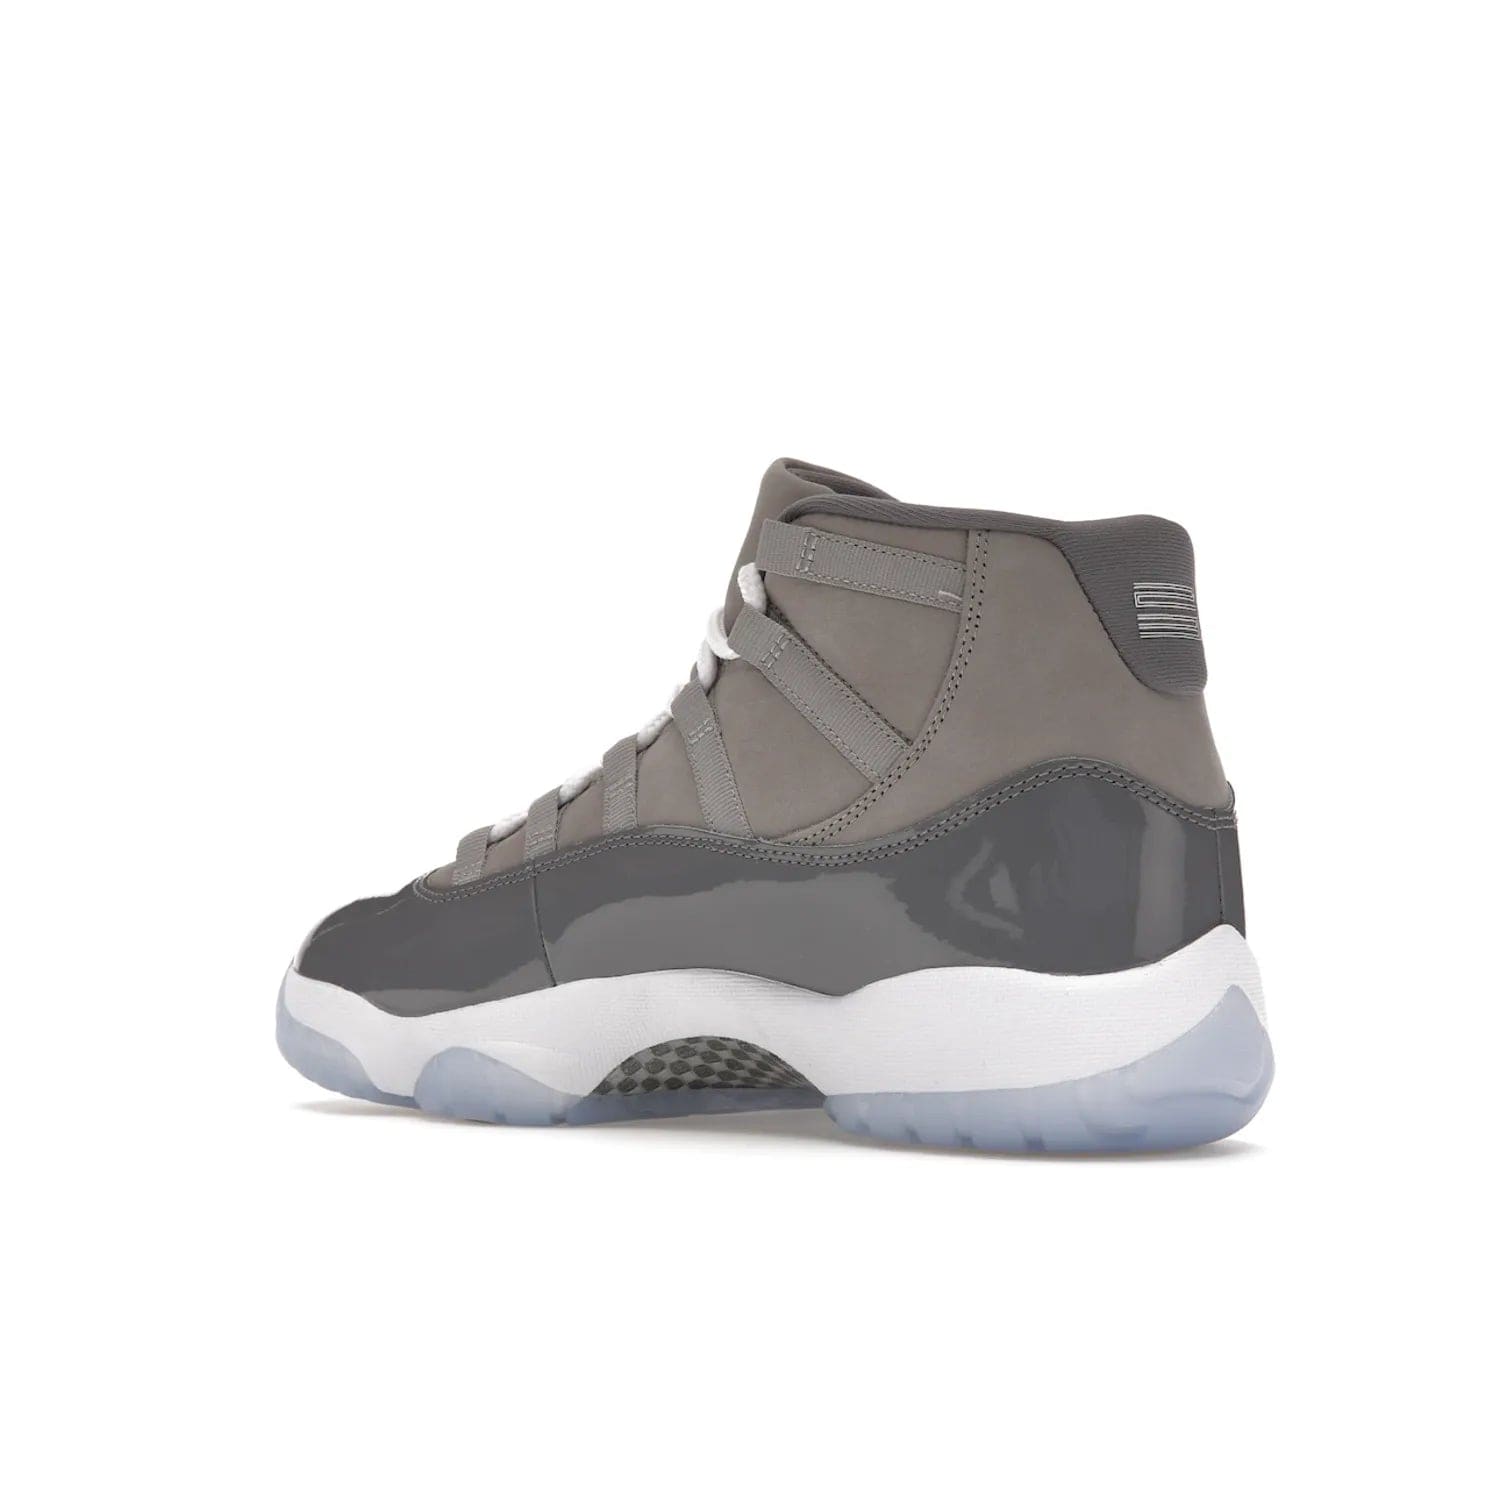 Jordan 11 Retro Cool Grey (2021) - Image 23 - Only at www.BallersClubKickz.com - Shop the Air Jordan 11 Retro Cool Grey (2021) for a must-have sneaker with a Cool Grey Durabuck upper, patent leather overlays, signature Jumpman embroidery, a white midsole, icy blue translucent outsole, and Multi-Color accents.  Released in December 2021 for $225.